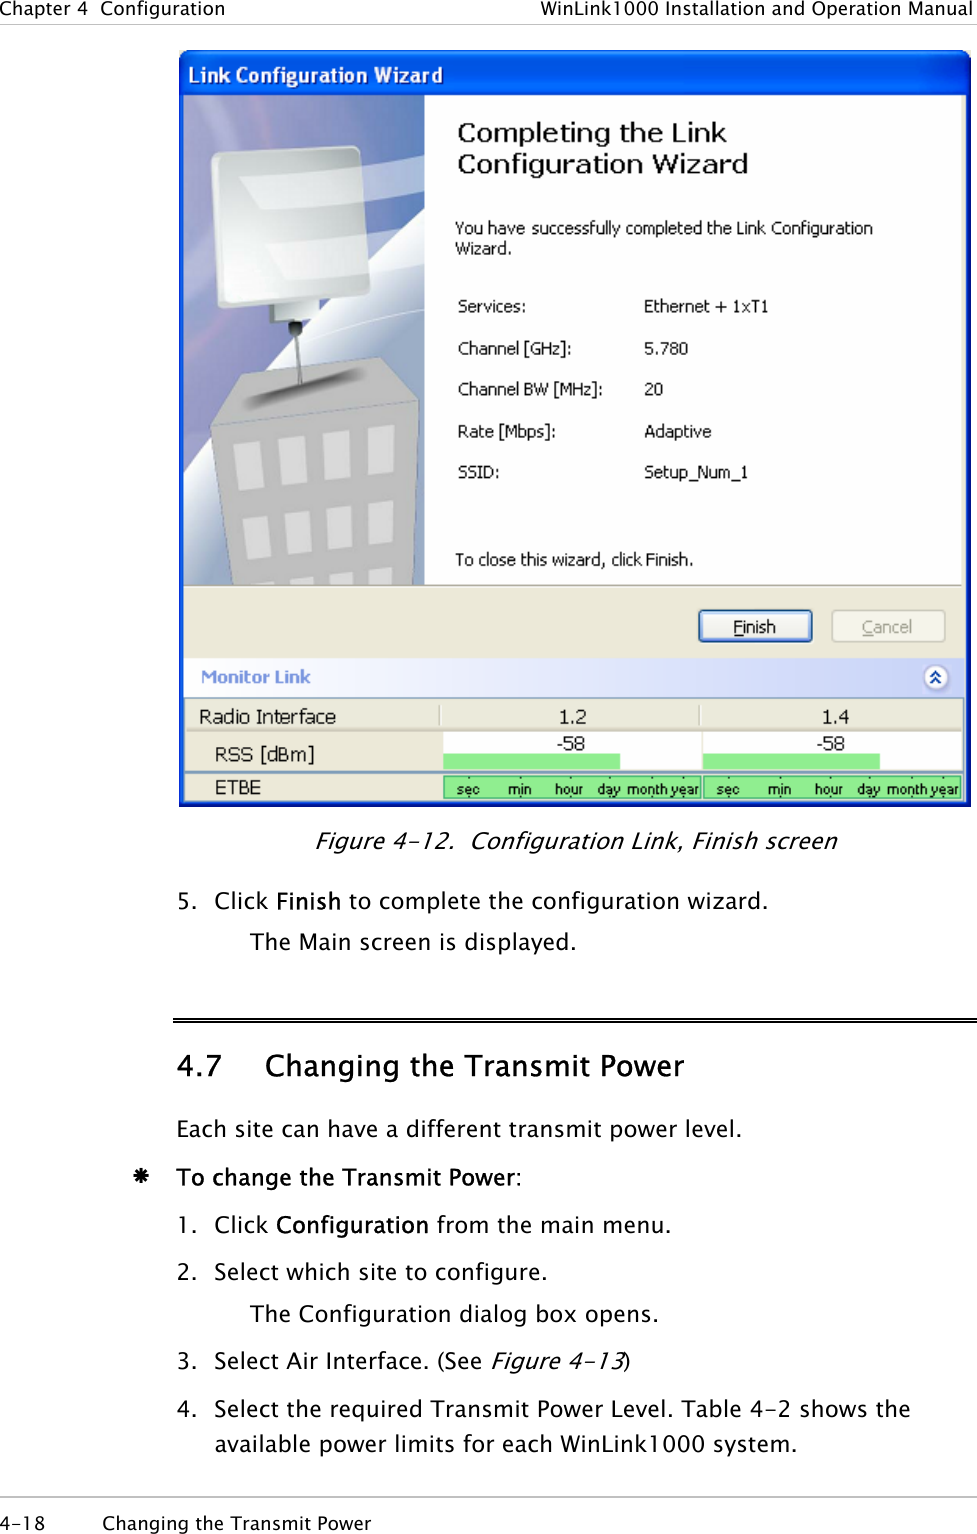 Chapter  4  Configuration  WinLink1000 Installation and Operation Manual  Figure  4-12.  Configuration Link, Finish screen 5. Click Finish to complete the configuration wizard. The Main screen is displayed. 4.7 Changing the Transmit Power Each site can have a different transmit power level.  Æ To change the Transmit Power: 1. Click Configuration from the main menu. 2. Select which site to configure. The Configuration dialog box opens. 3. Select Air Interface. (See Figure  4-13) 4. Select the required Transmit Power Level. Table  4-2 shows the available power limits for each WinLink1000 system.  4-18  Changing the Transmit Power  